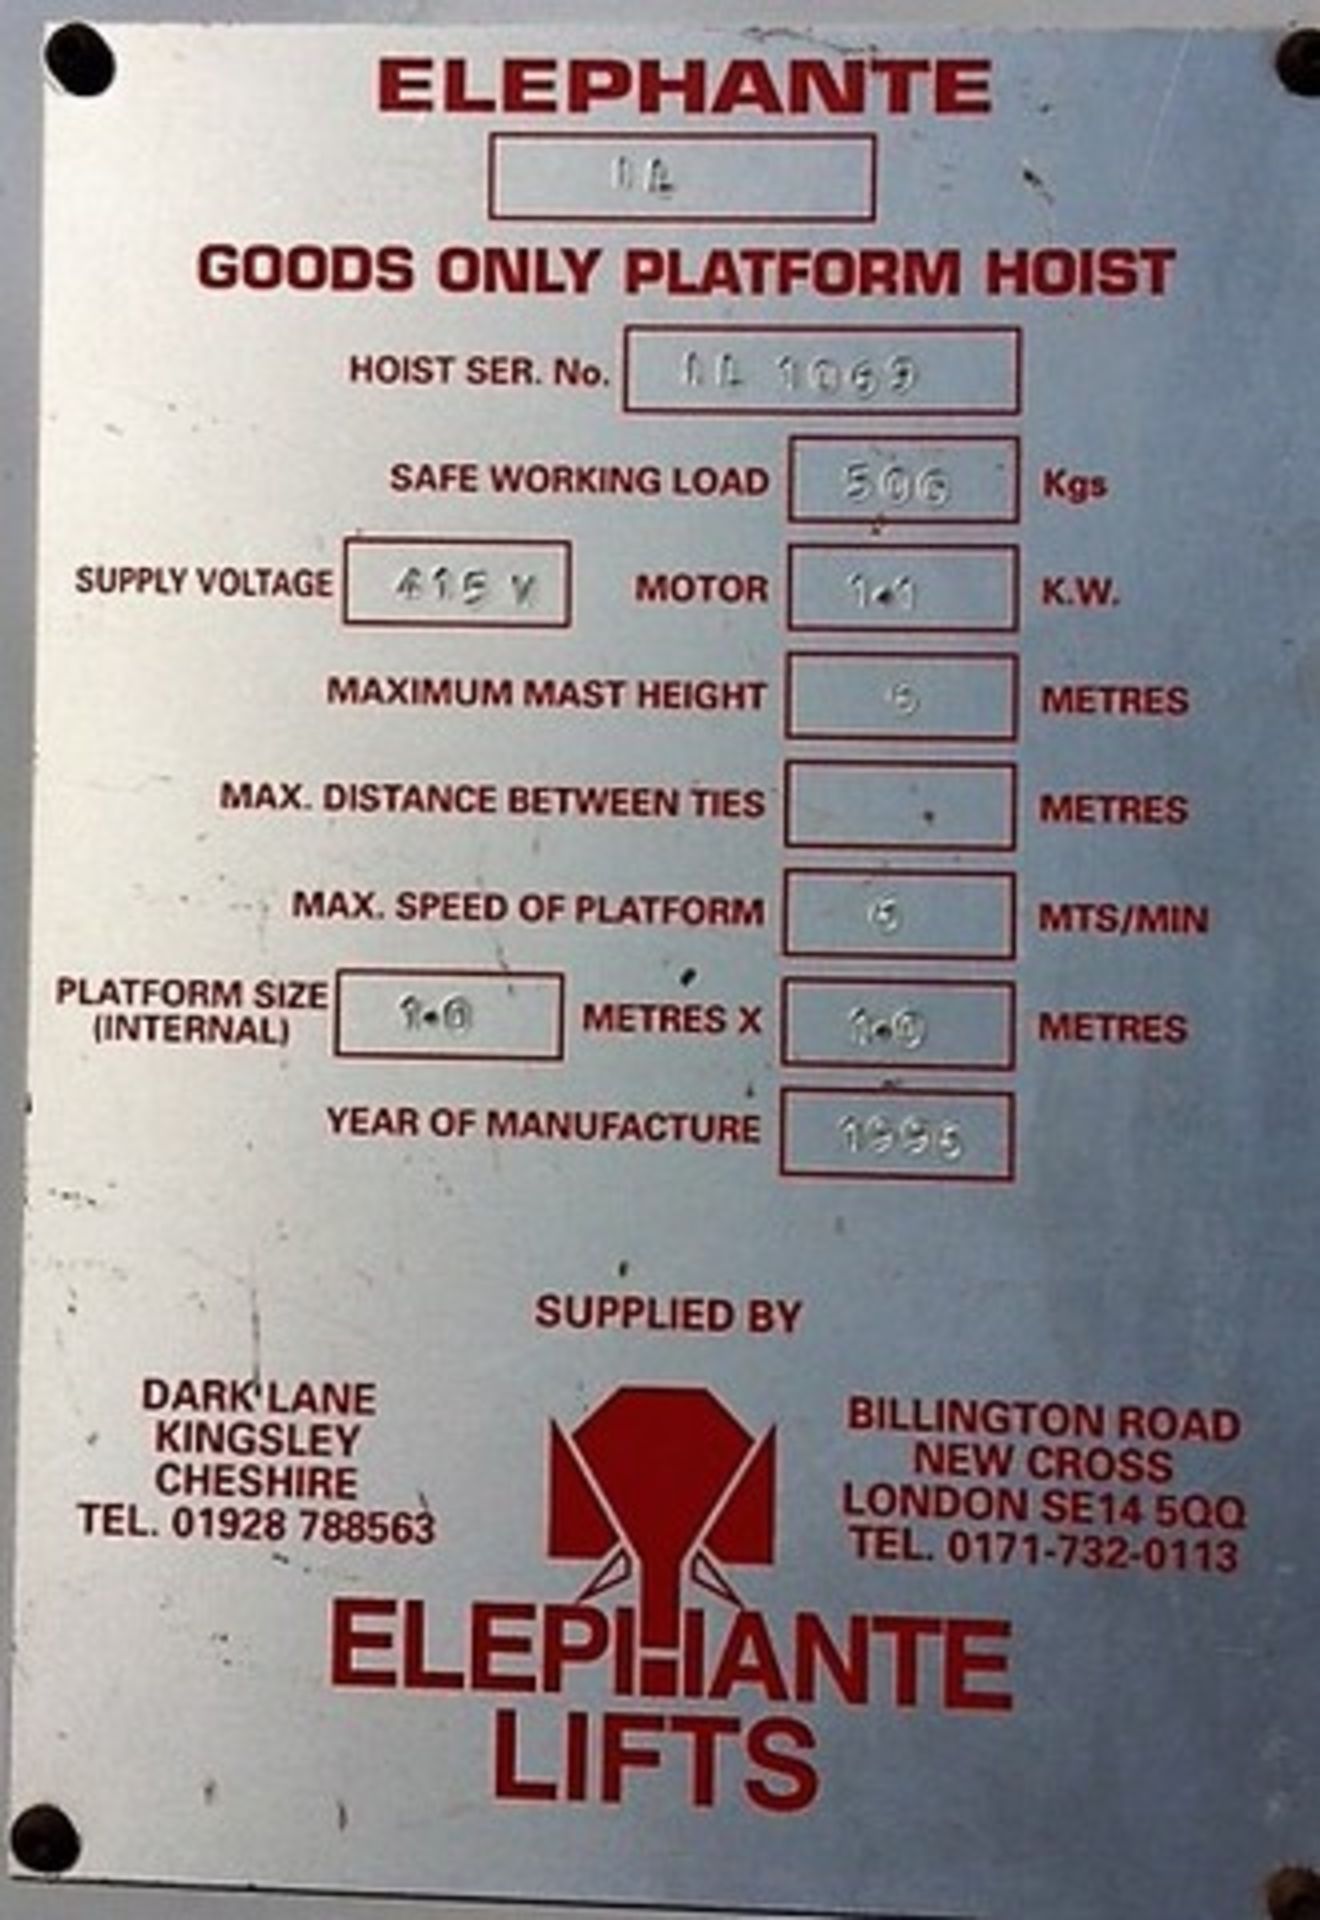 1996 ELEPHANTE goods only lift. Safe working load 500kg. S/N 1L1069. Supply voltage 415. Max mast he - Image 3 of 5